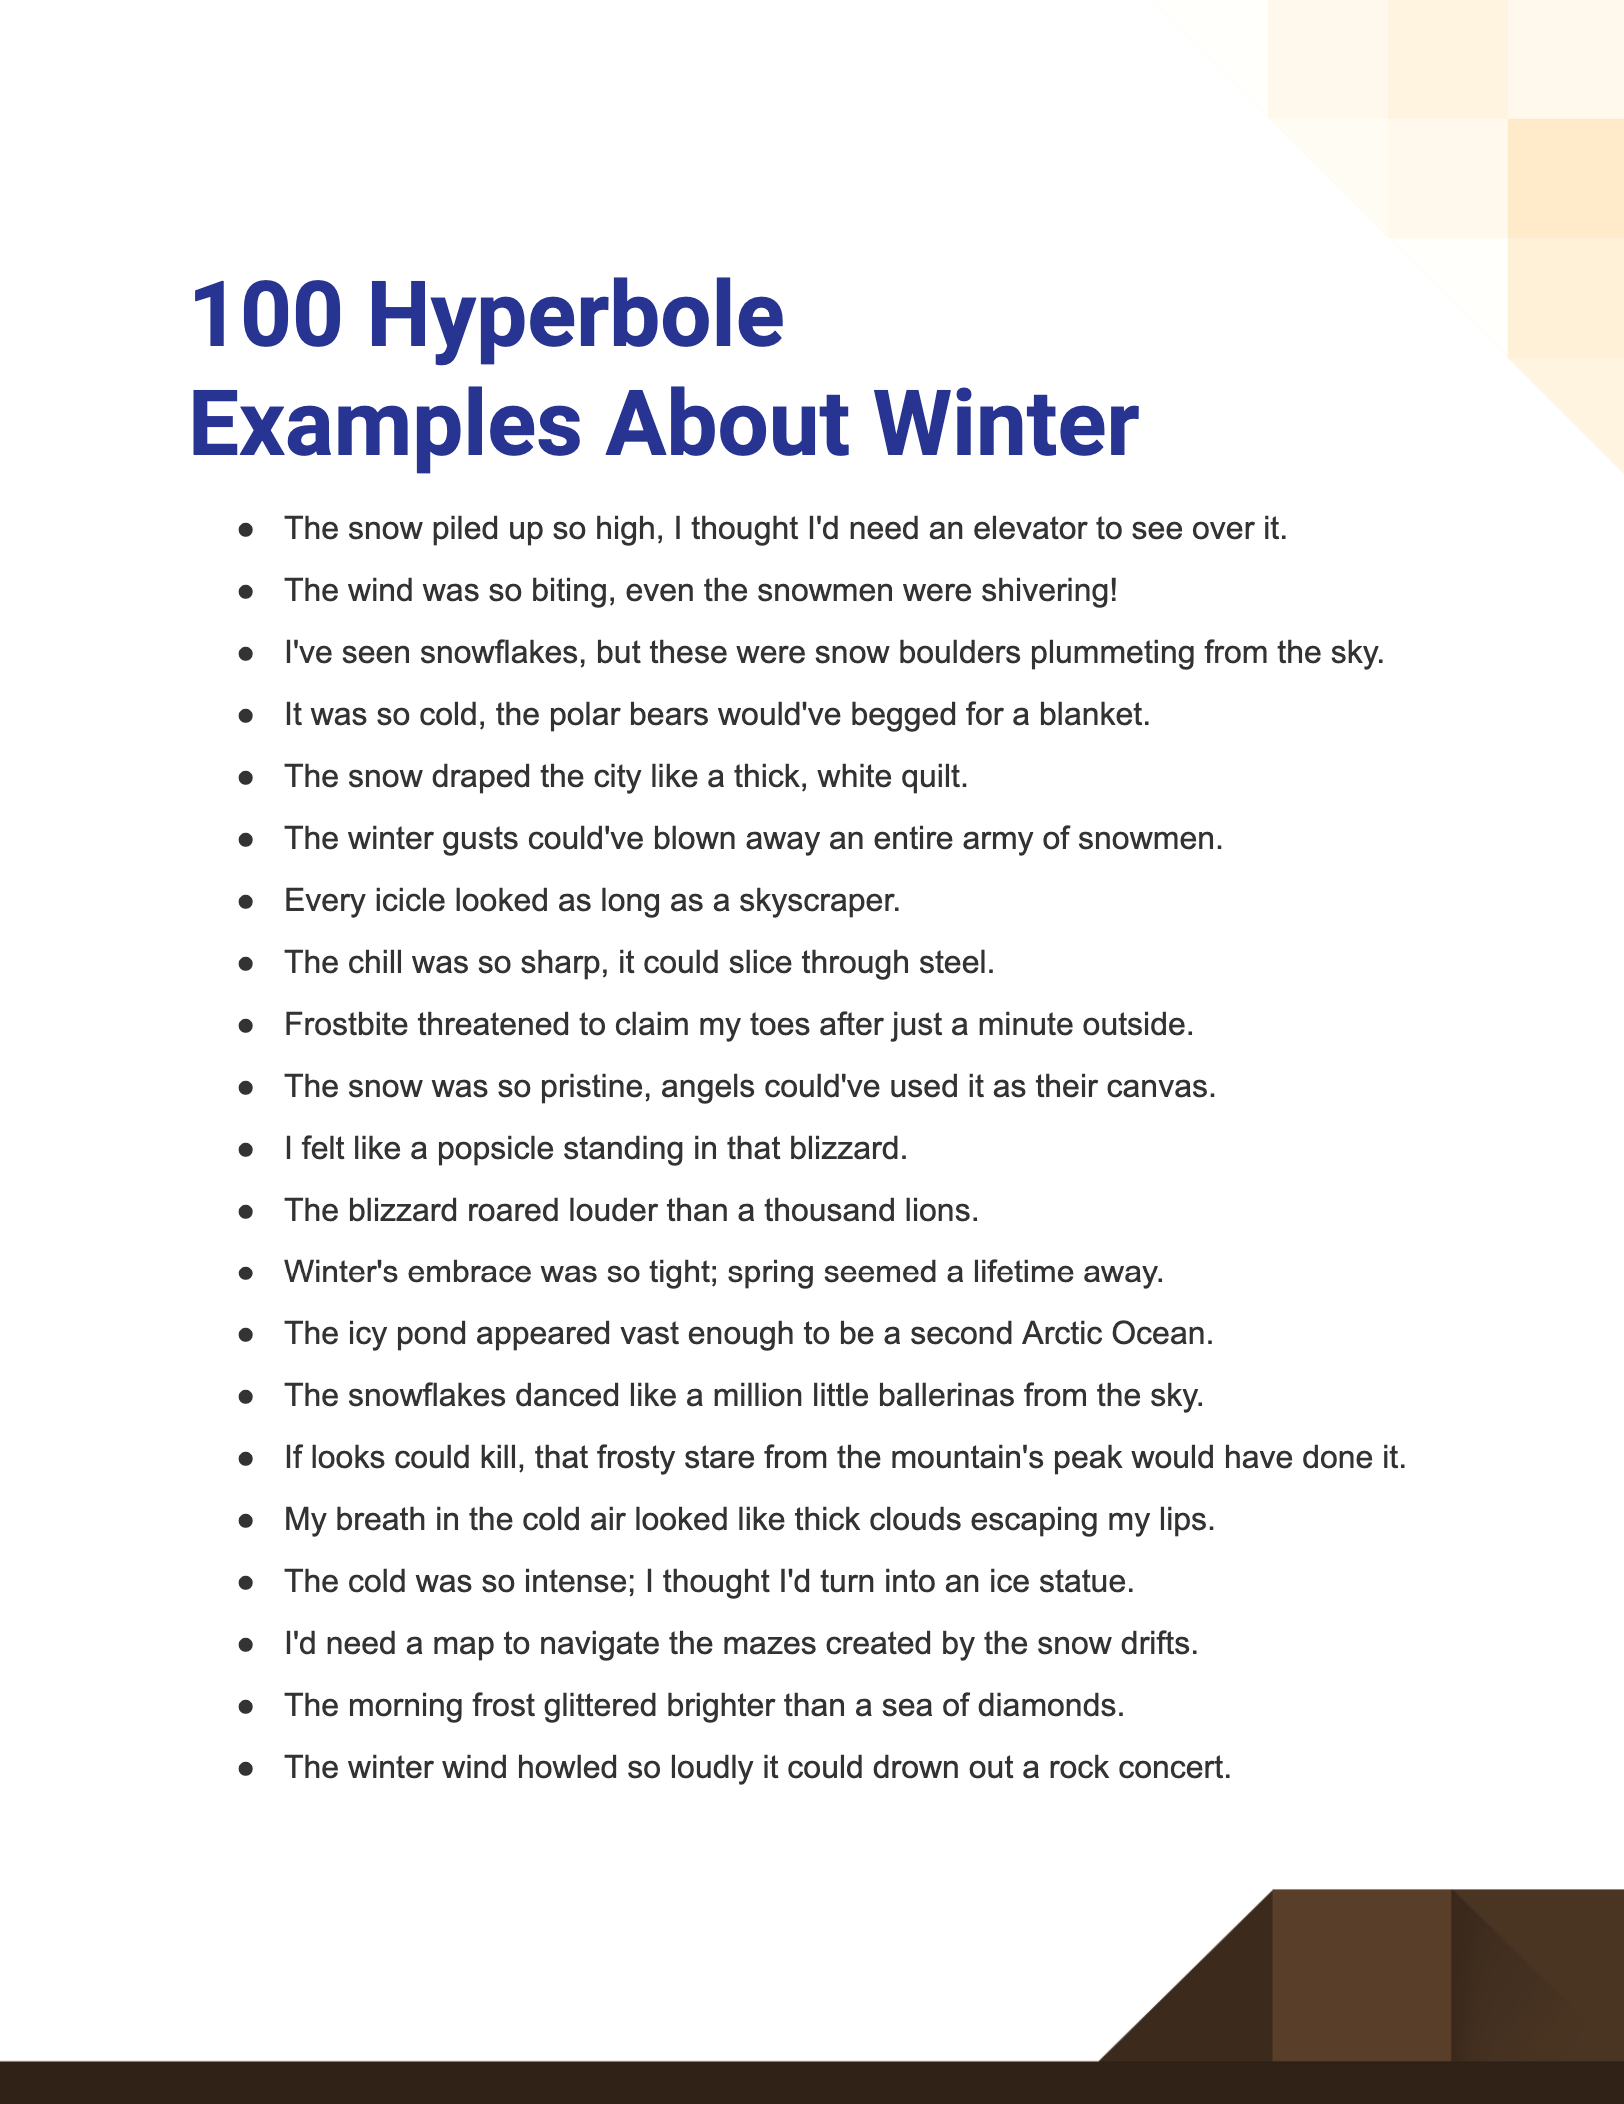 hyperbole examples about winter1